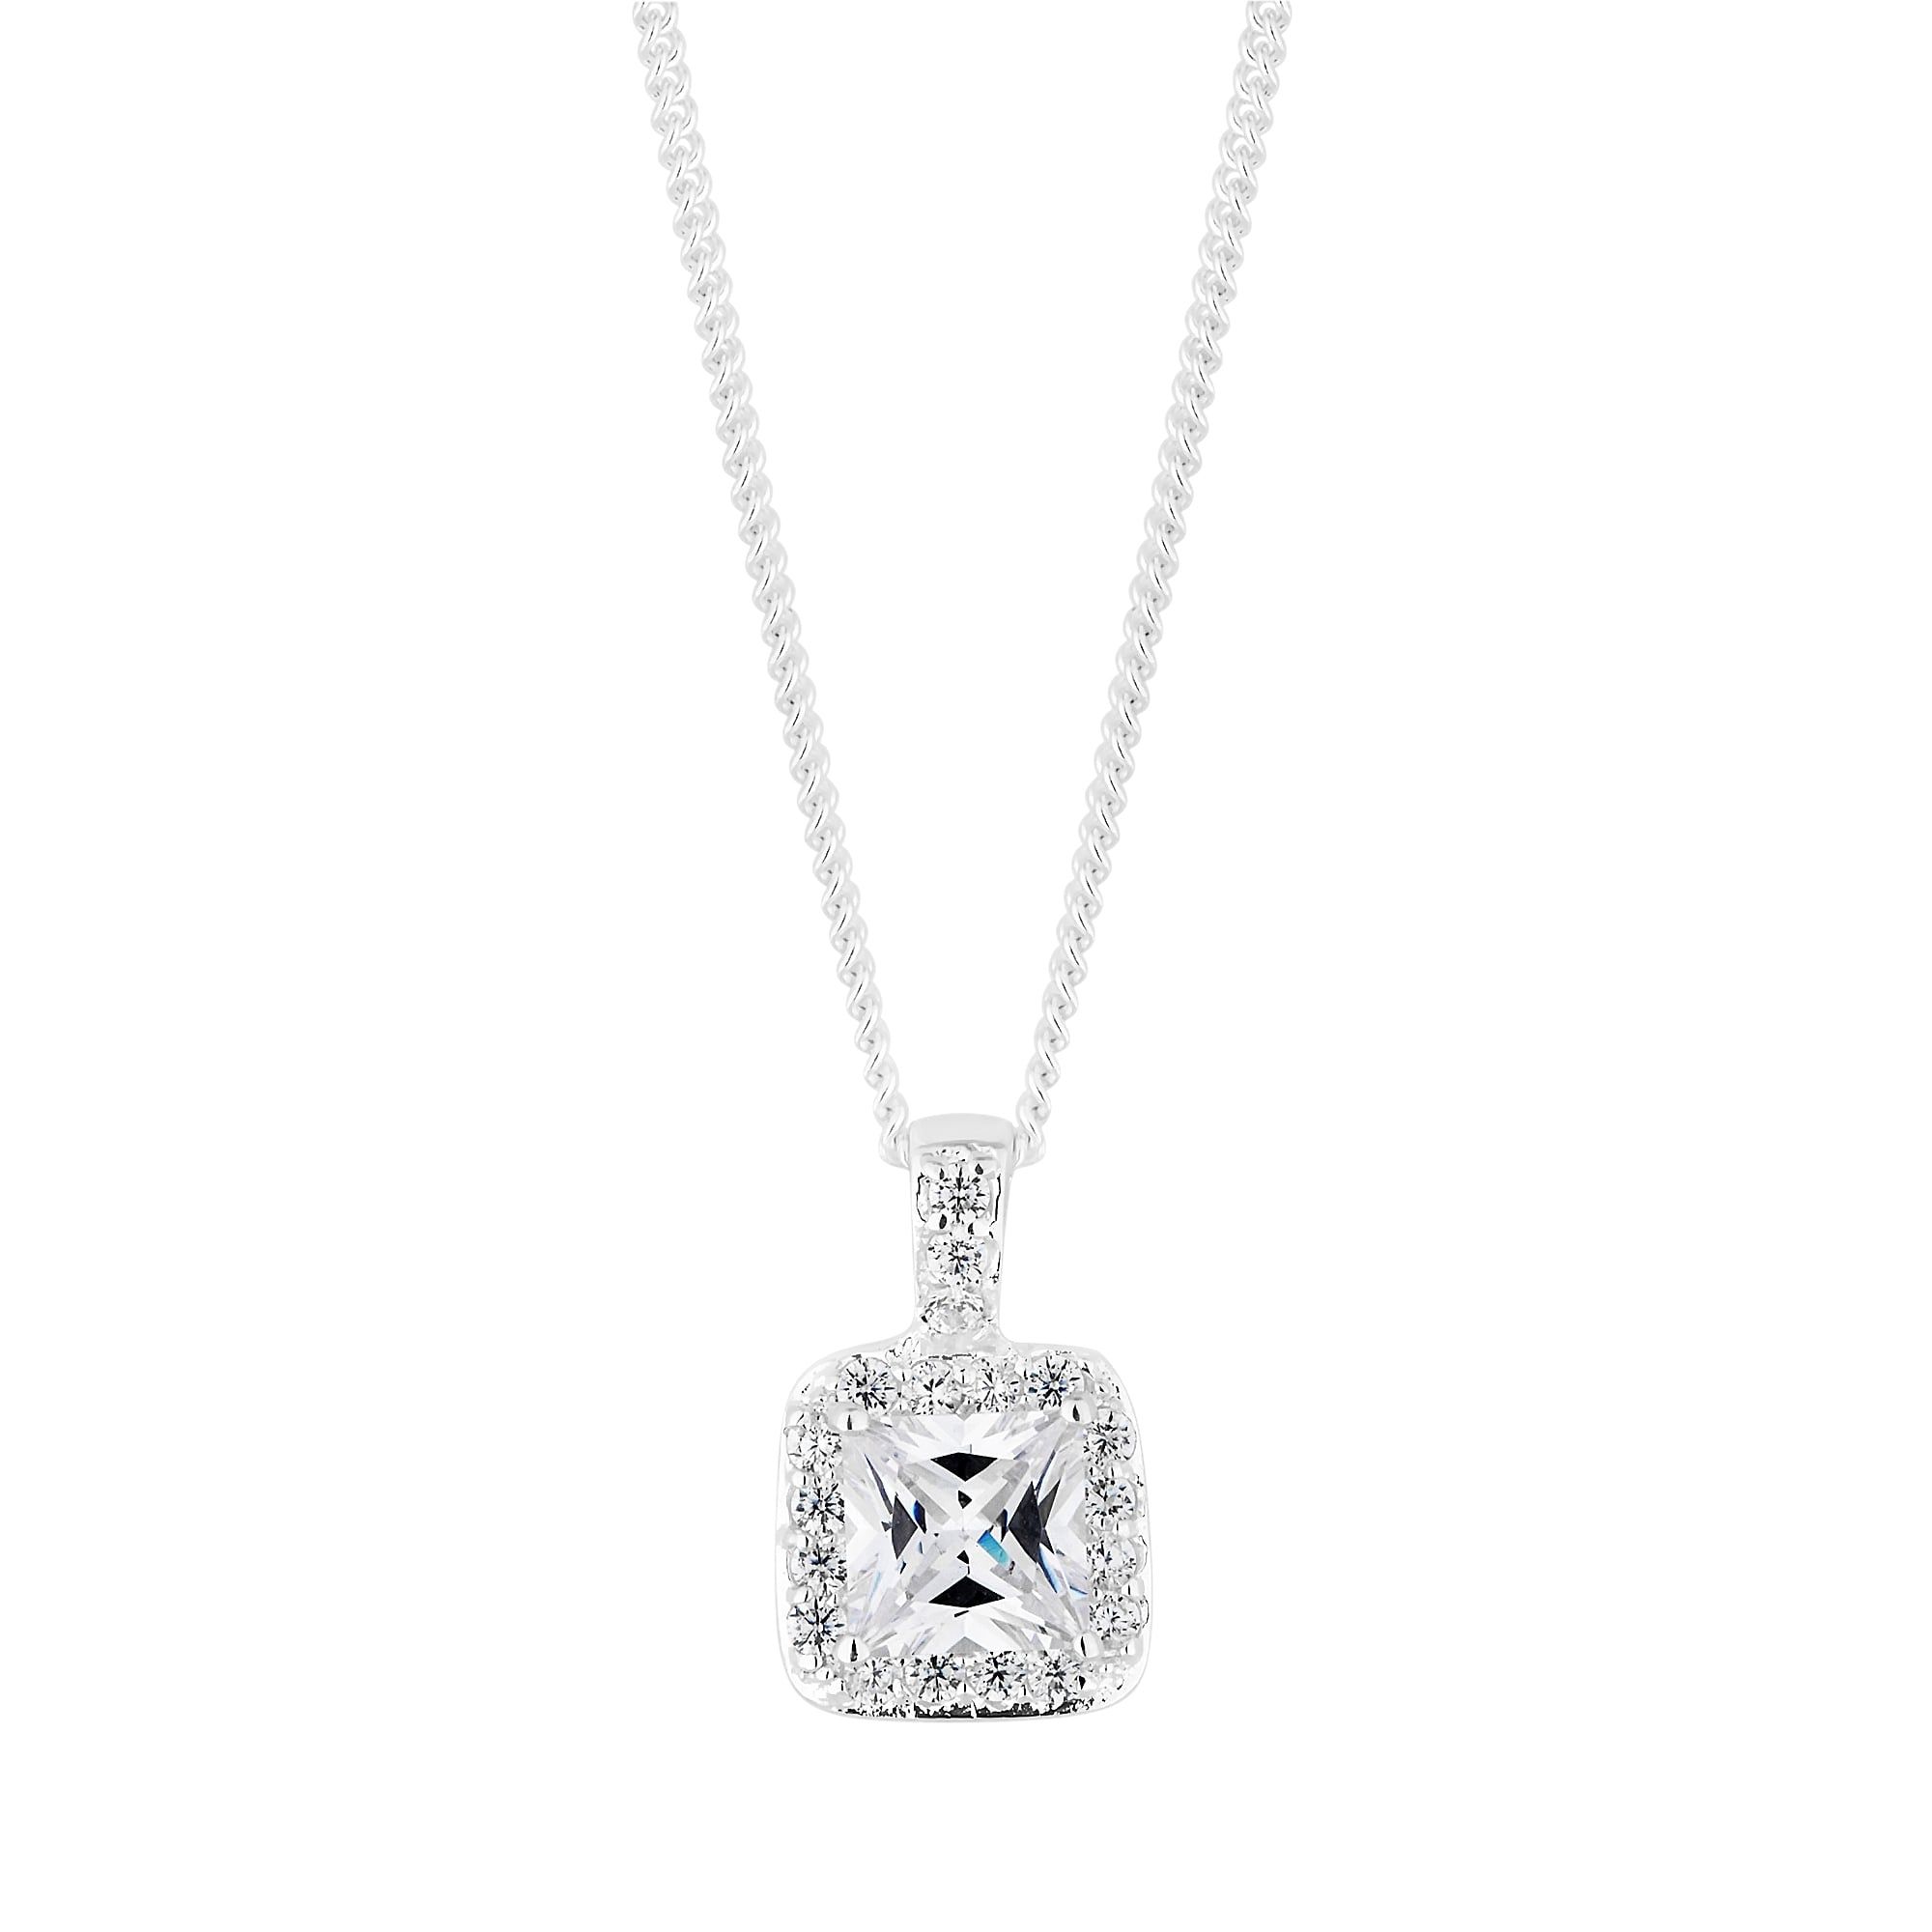 Sterling Silver 925 Cubic Zirconia Square Shaped Halo Pendant Necklace With Regard To Most Recently Released Sparkling Square Halo Pendant Necklaces (View 1 of 25)